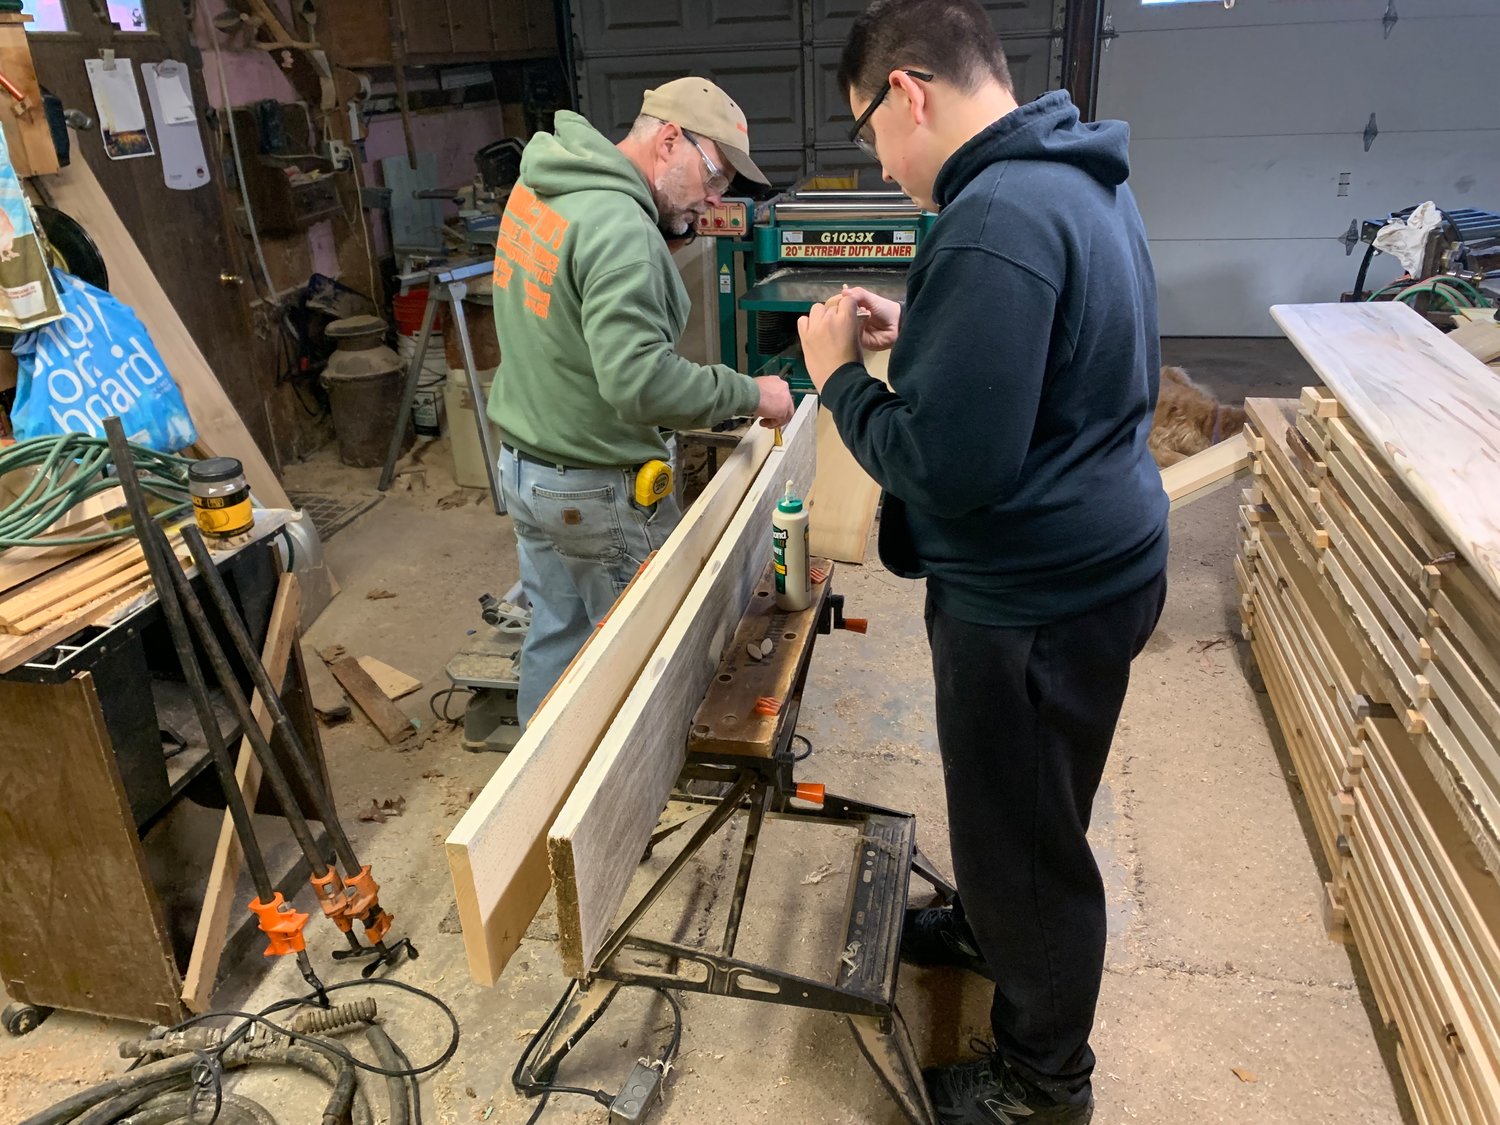 Ethan Raykoff (right) works with Boy Scout Troop 97 Scoutmaster Neil Terwilliger as he begins work on his Eagle Project, building Little Free Libraries for Town of Neversink parks.  The project will be completed in the spring with the help of volunteers under Raykoff’s leadership.